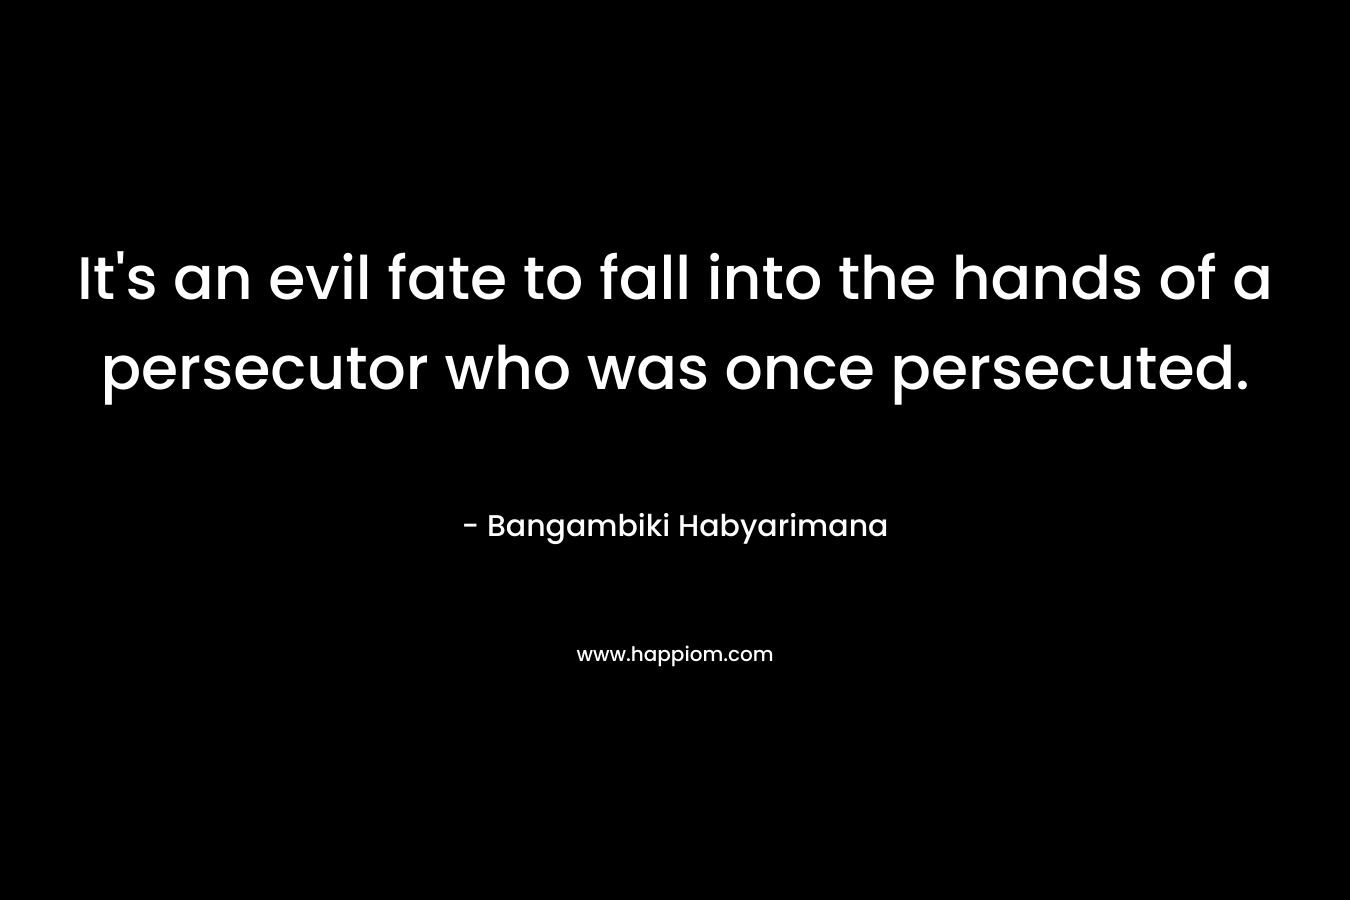 It's an evil fate to fall into the hands of a persecutor who was once persecuted.